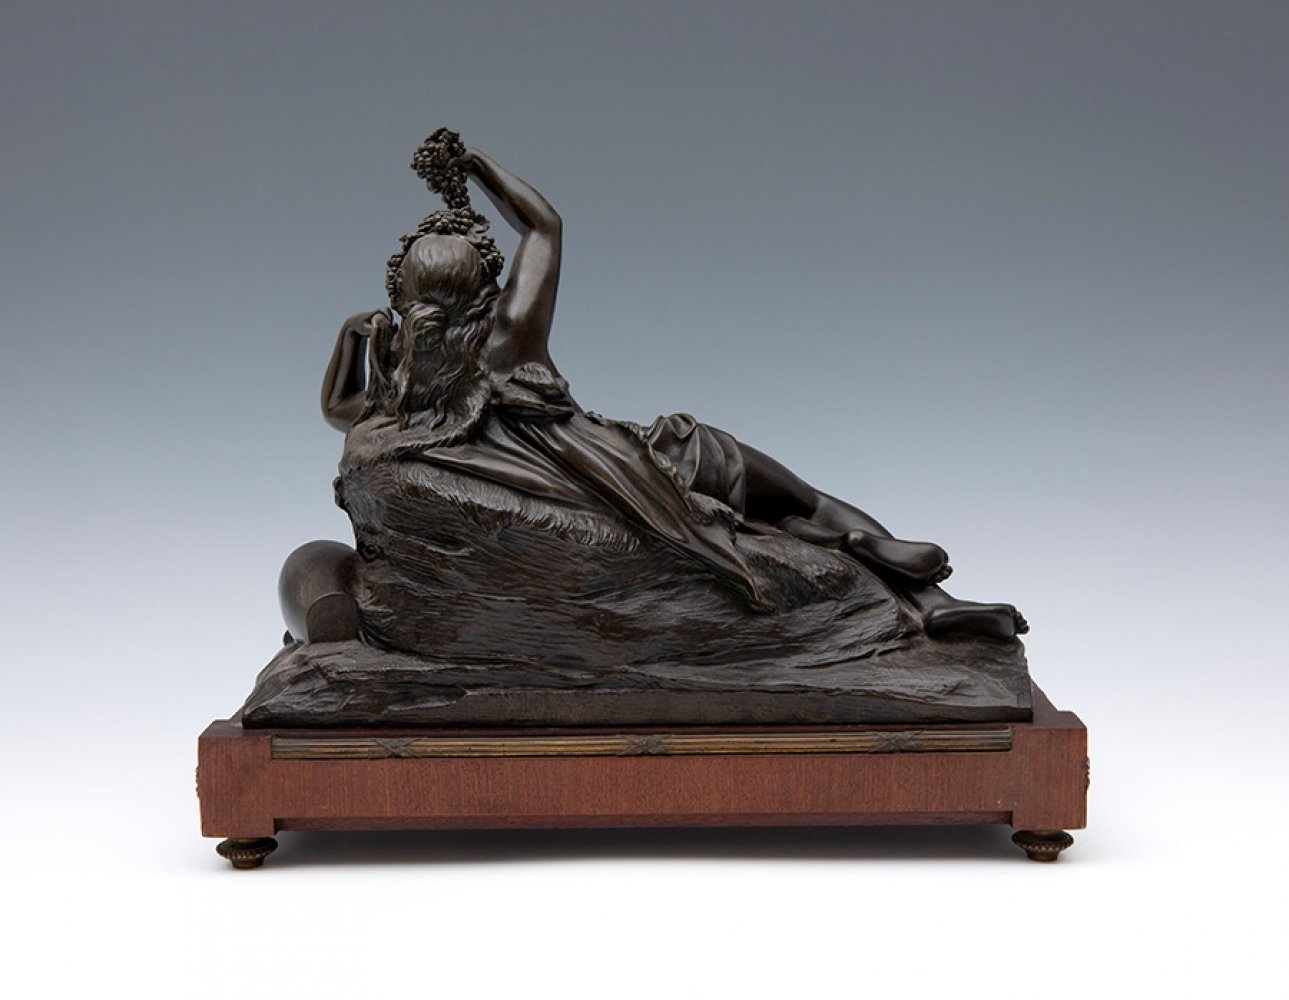 French or Italian school, mid-19th century."Allegory of Autumn".Patinated bronze. Wooden base. - Image 5 of 5